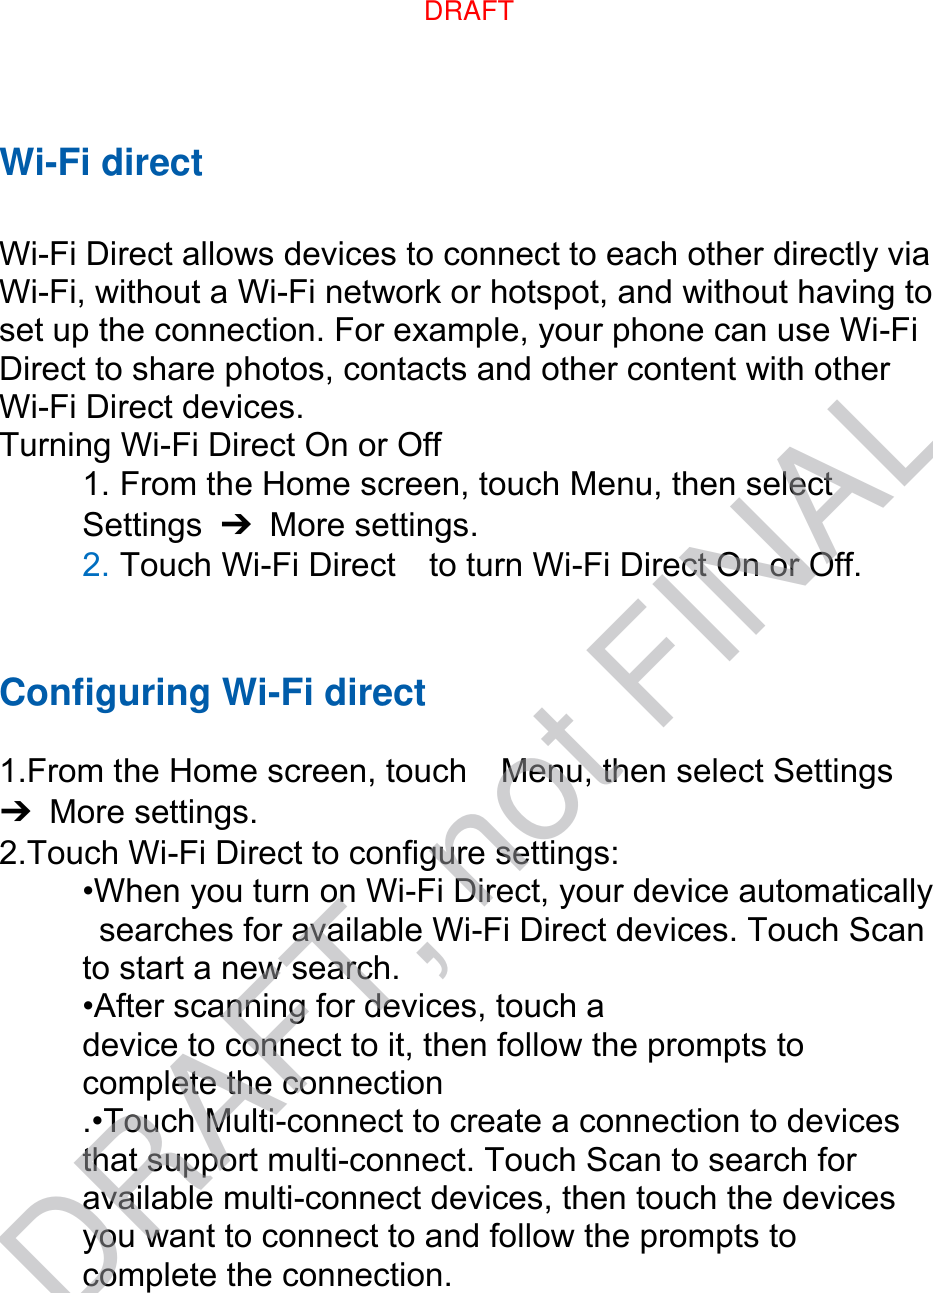 Wi-Fi direct  Wi-Fi Direct allows devices to connect to each other directly via Wi-Fi, without a Wi-Fi network or hotspot, and without having to set up the connection. For example, your phone can use Wi-Fi Direct to share photos, contacts and other content with other Wi-Fi Direct devices.   Turning Wi-Fi Direct On or Off 1. From the Home screen, touch Menu, then select   Settings  ➔  More settings. 2. Touch Wi-Fi Direct    to turn Wi-Fi Direct On or Off.   Configuring Wi-Fi direct    1.From the Home screen, touch    Menu, then select Settings ➔  More settings. 2.Touch Wi-Fi Direct to configure settings:   •When you turn on Wi-Fi Direct, your device automatically   searches for available Wi-Fi Direct devices. Touch Scan   to start a new search. •After scanning for devices, touch a   device to connect to it, then follow the prompts to   complete the connection .•Touch Multi-connect to create a connection to devices that support multi-connect. Touch Scan to search for available multi-connect devices, then touch the devices you want to connect to and follow the prompts to complete the connection.DRAFT, not FINALDRAFT